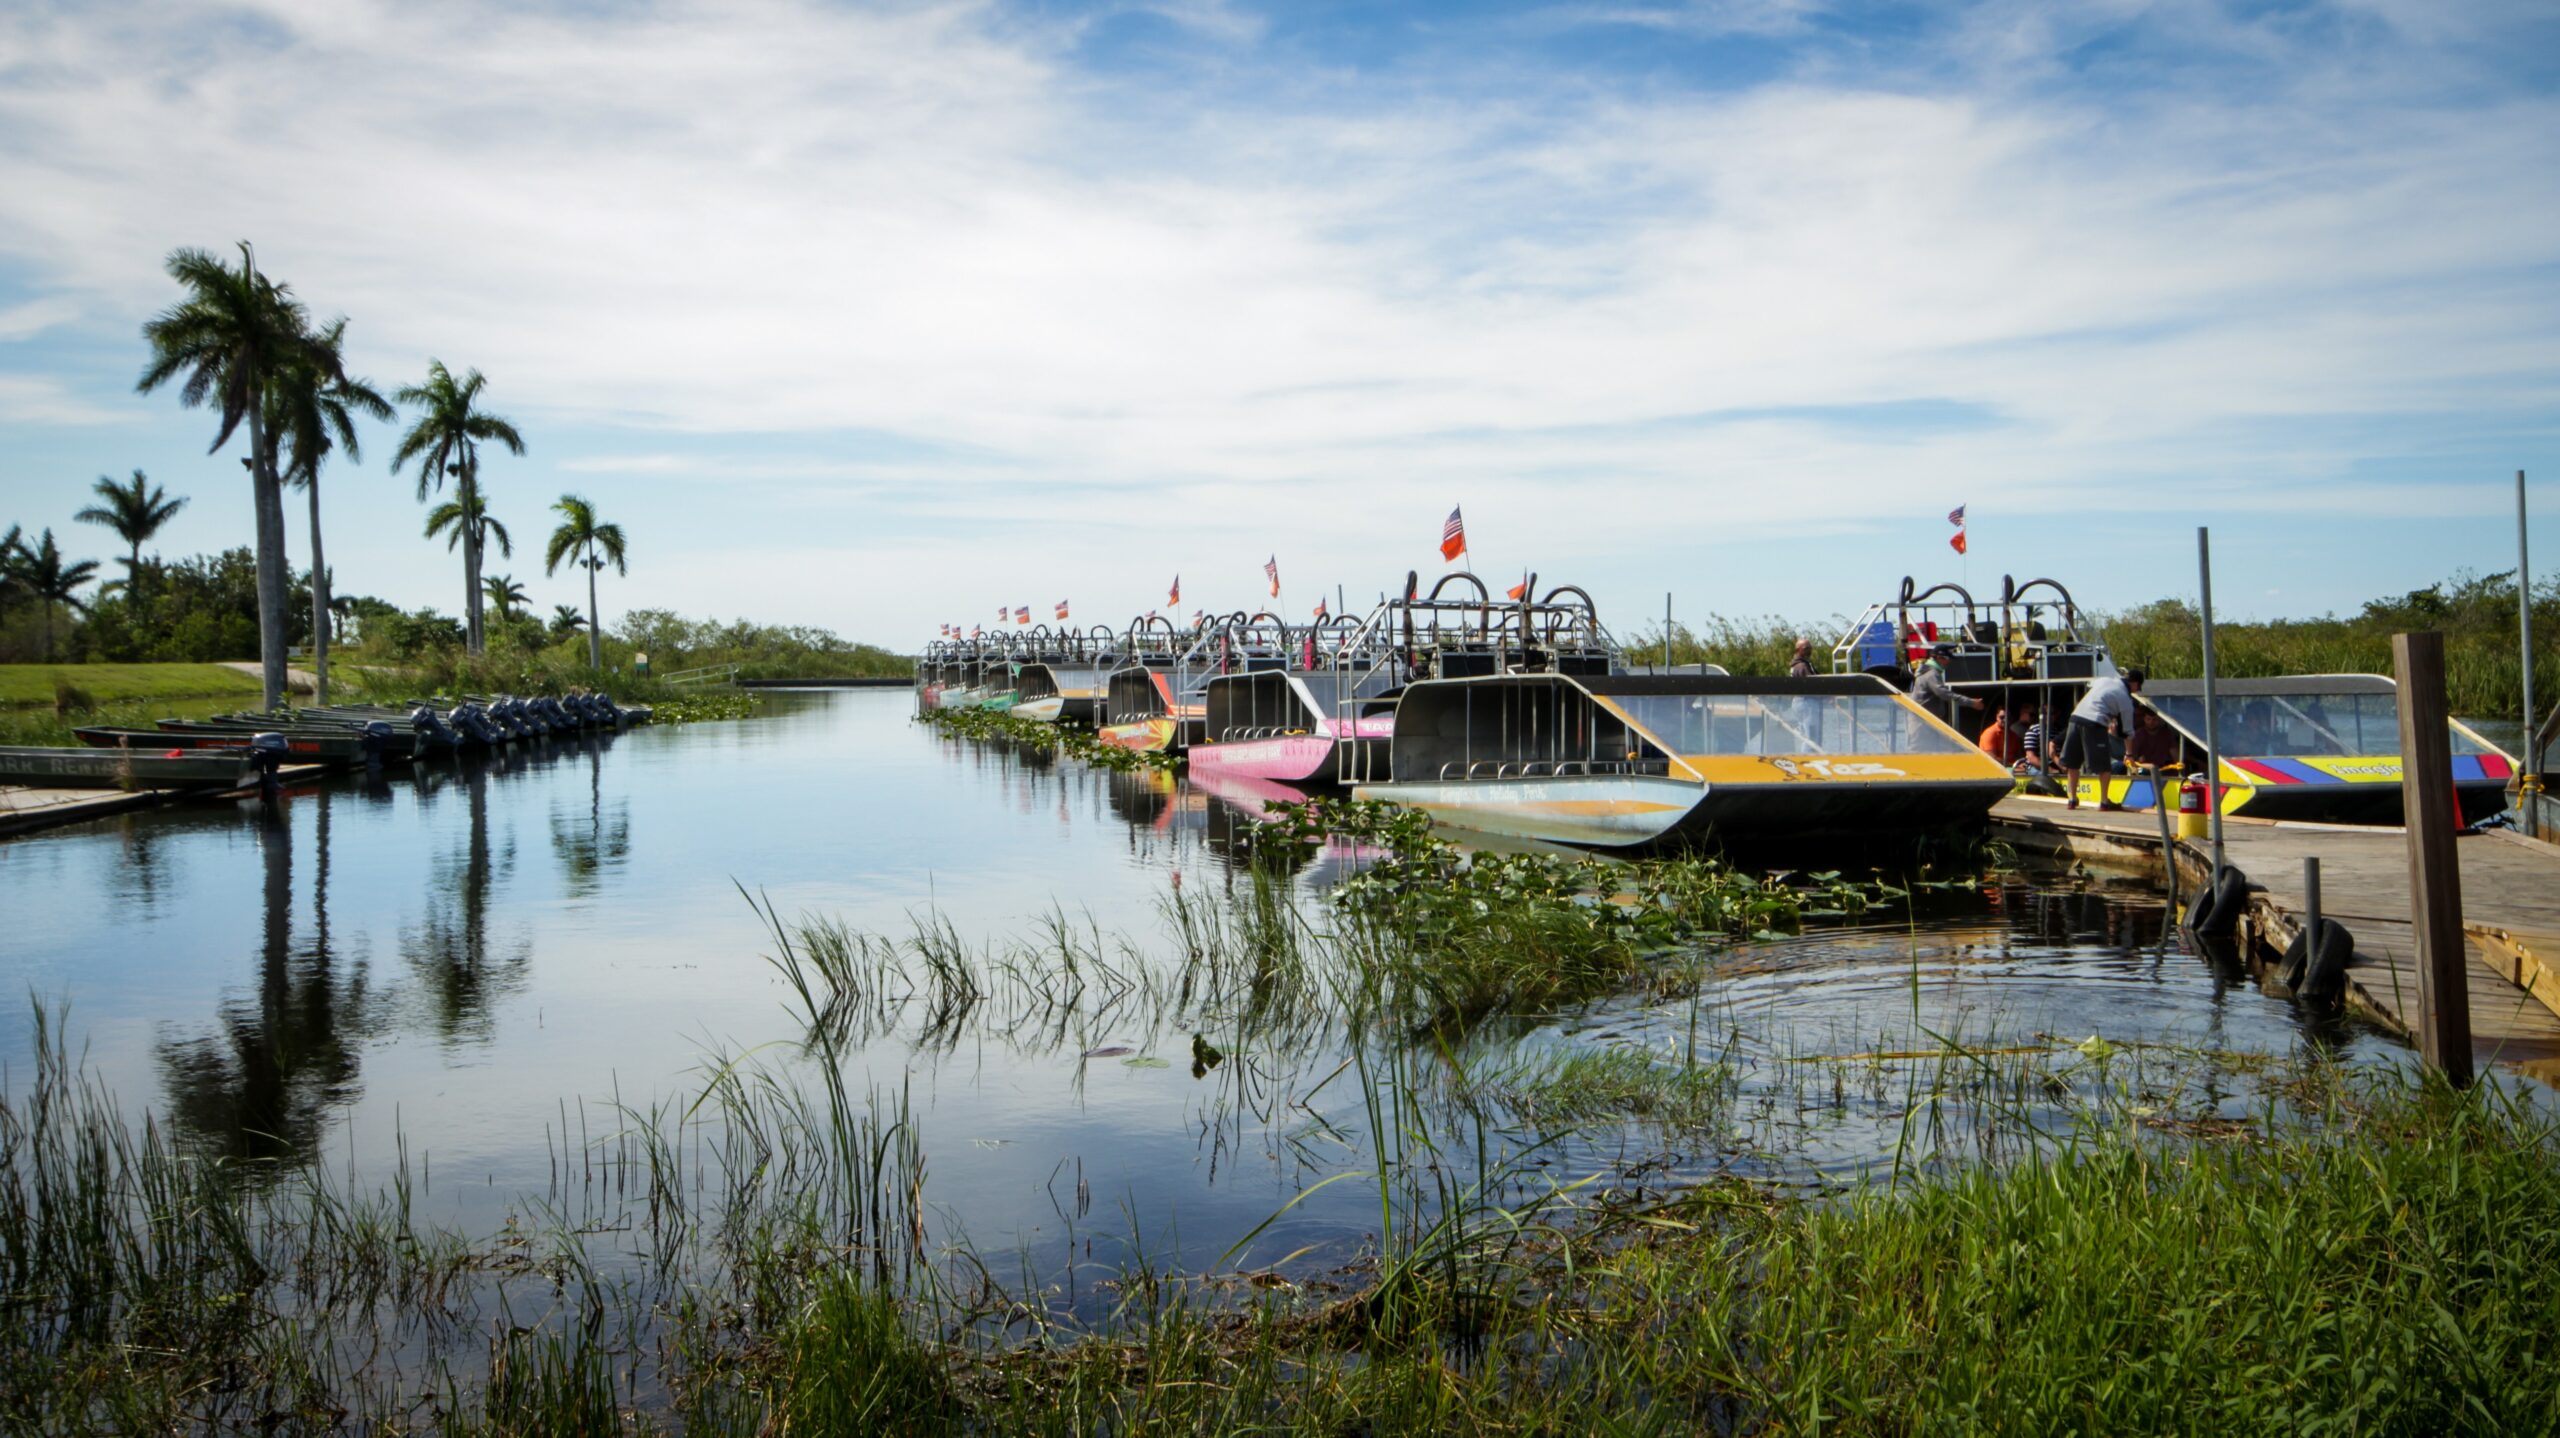 Airboats sit docked in the Everglades